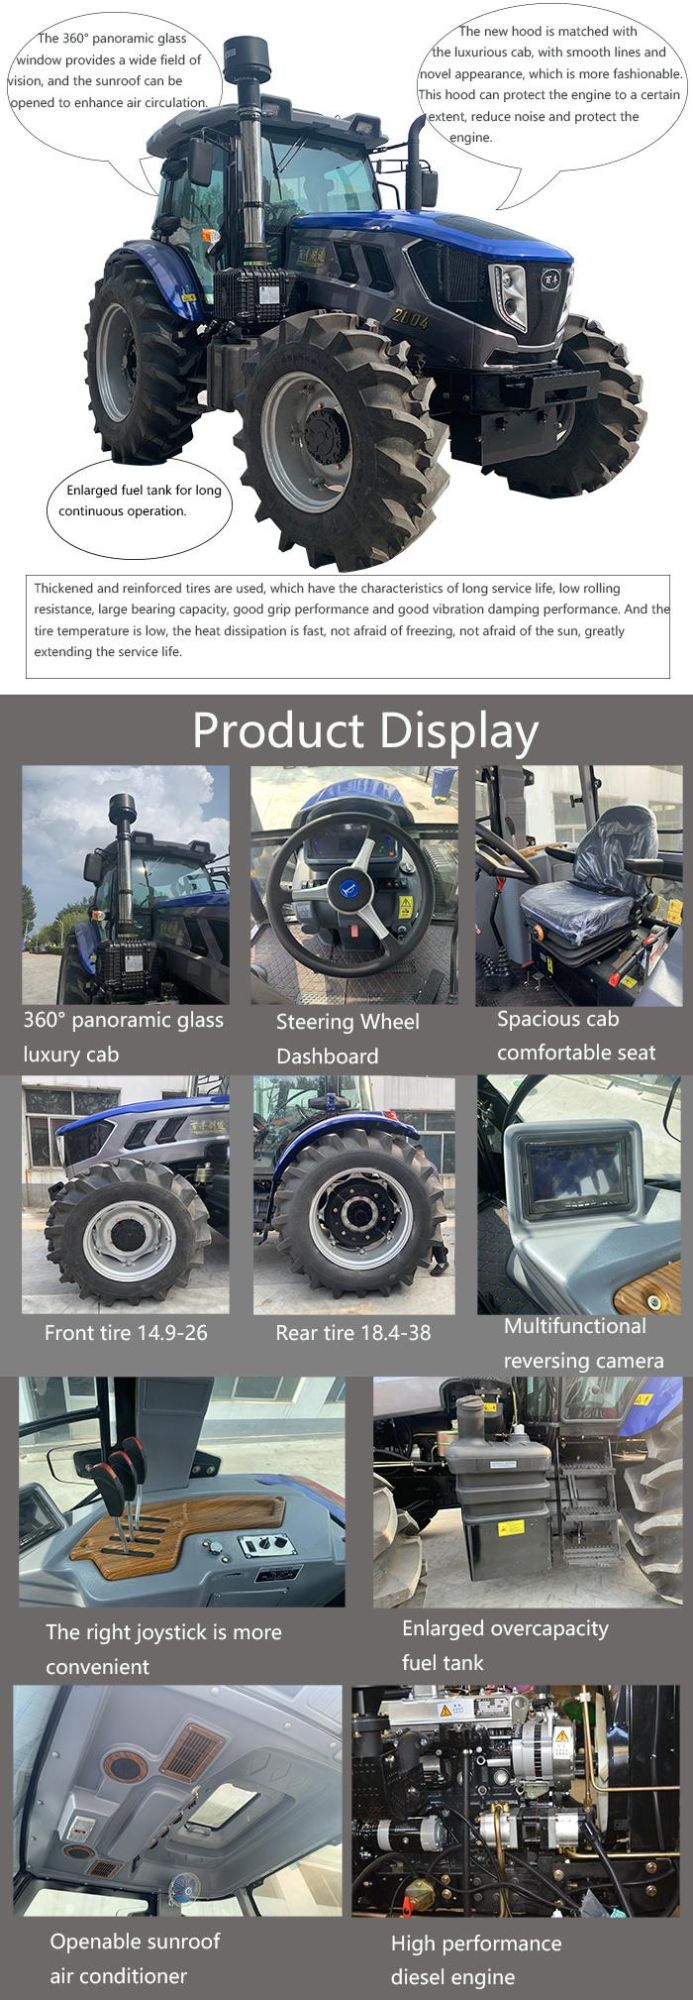 Explosive Models Sell Like Hot Cakes Utility Professional Standard Agricultural Farm Tractors with High Horsepower